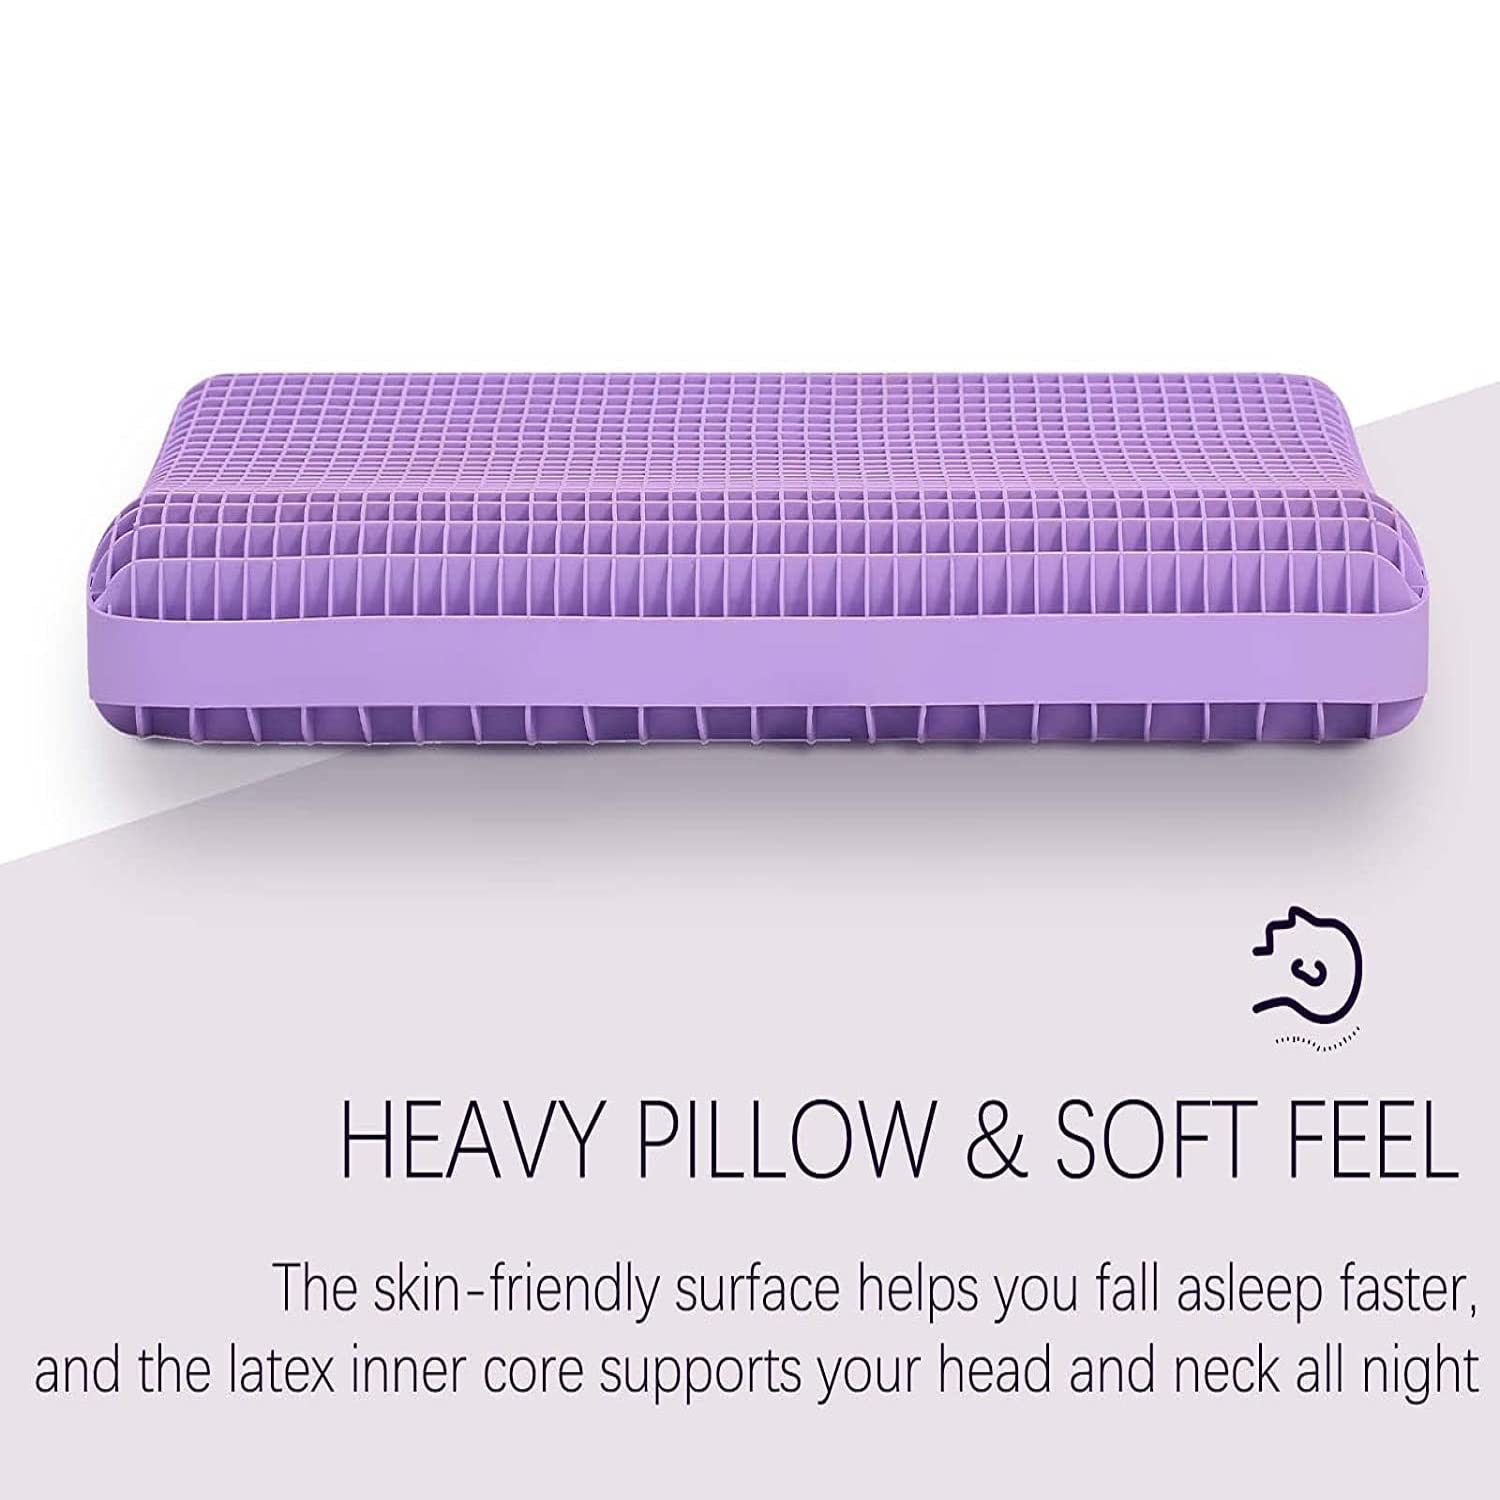 Soft and supportive pillow made from eco-friendly 